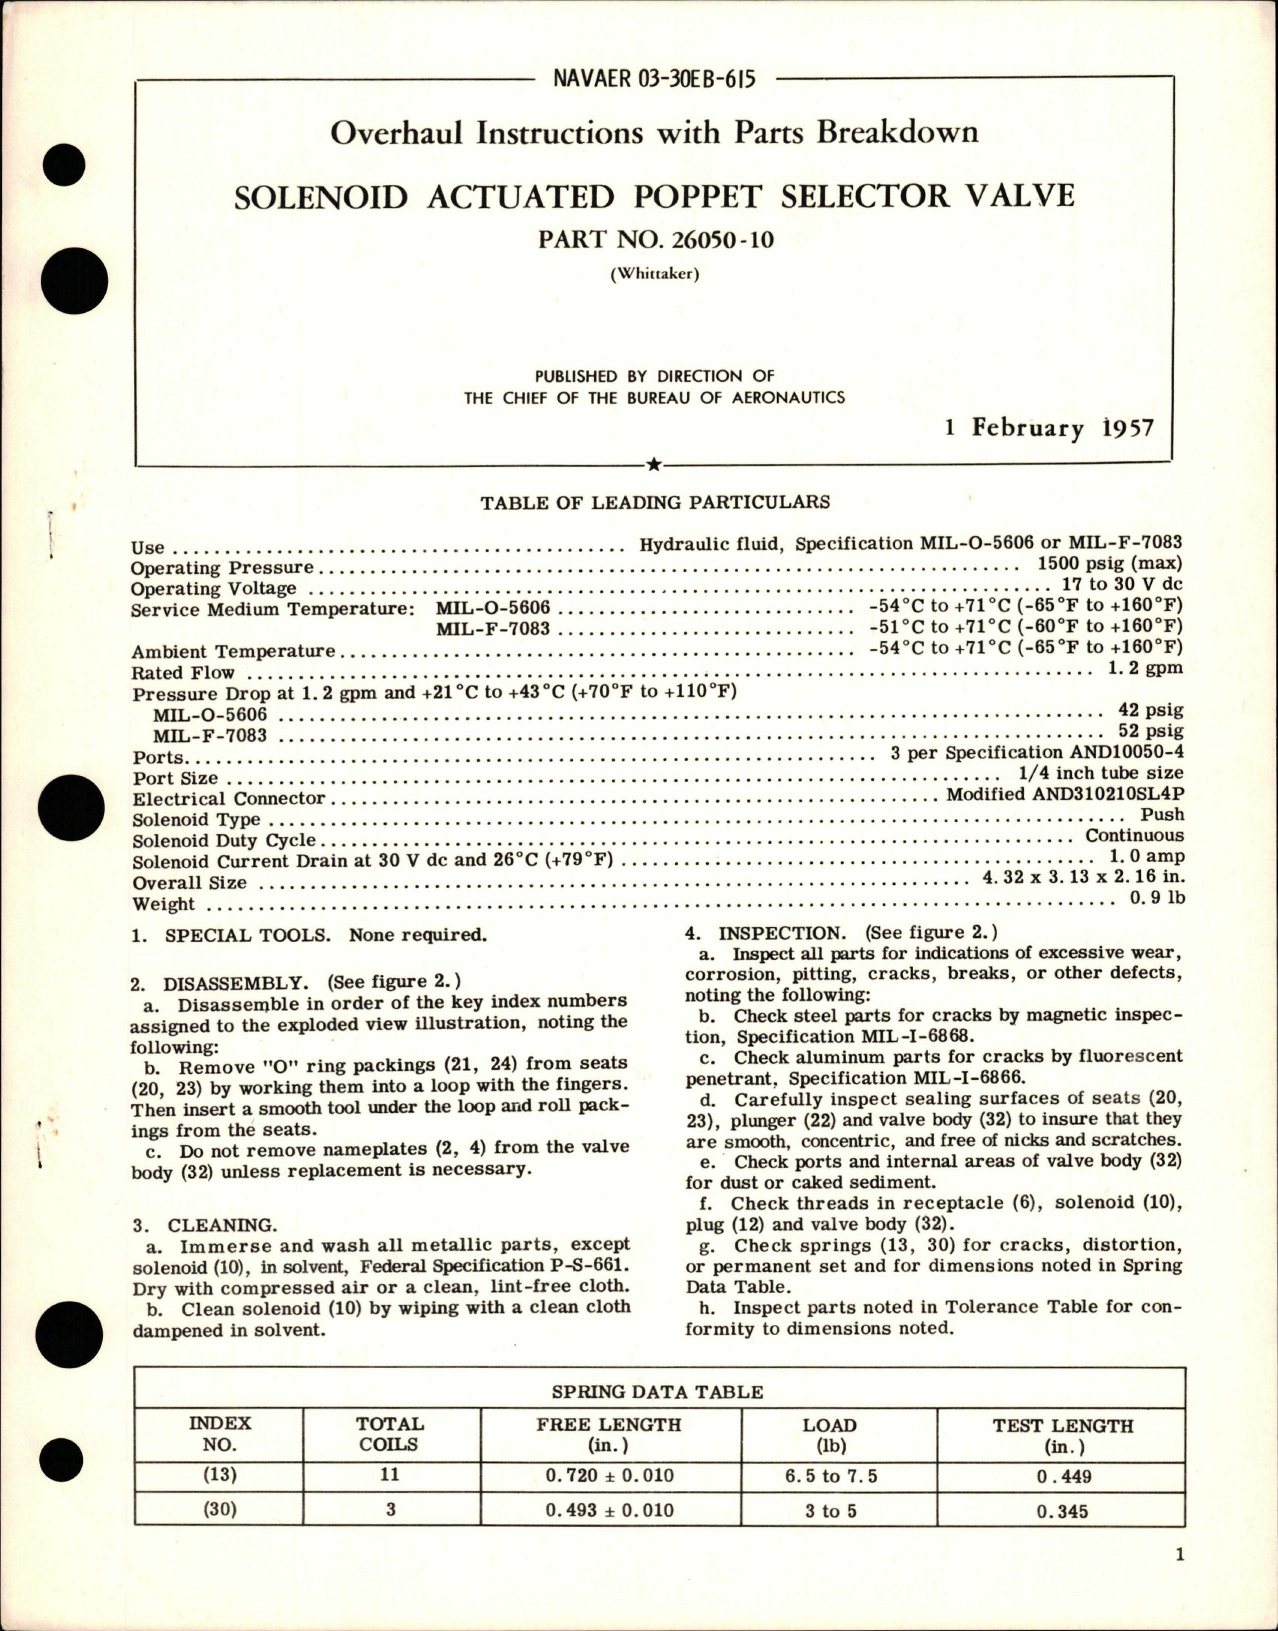 Sample page 1 from AirCorps Library document: Overhaul Instructions with Parts Breakdown for Solenoid Actuated Poppet Selector Valve - Part 26050-10